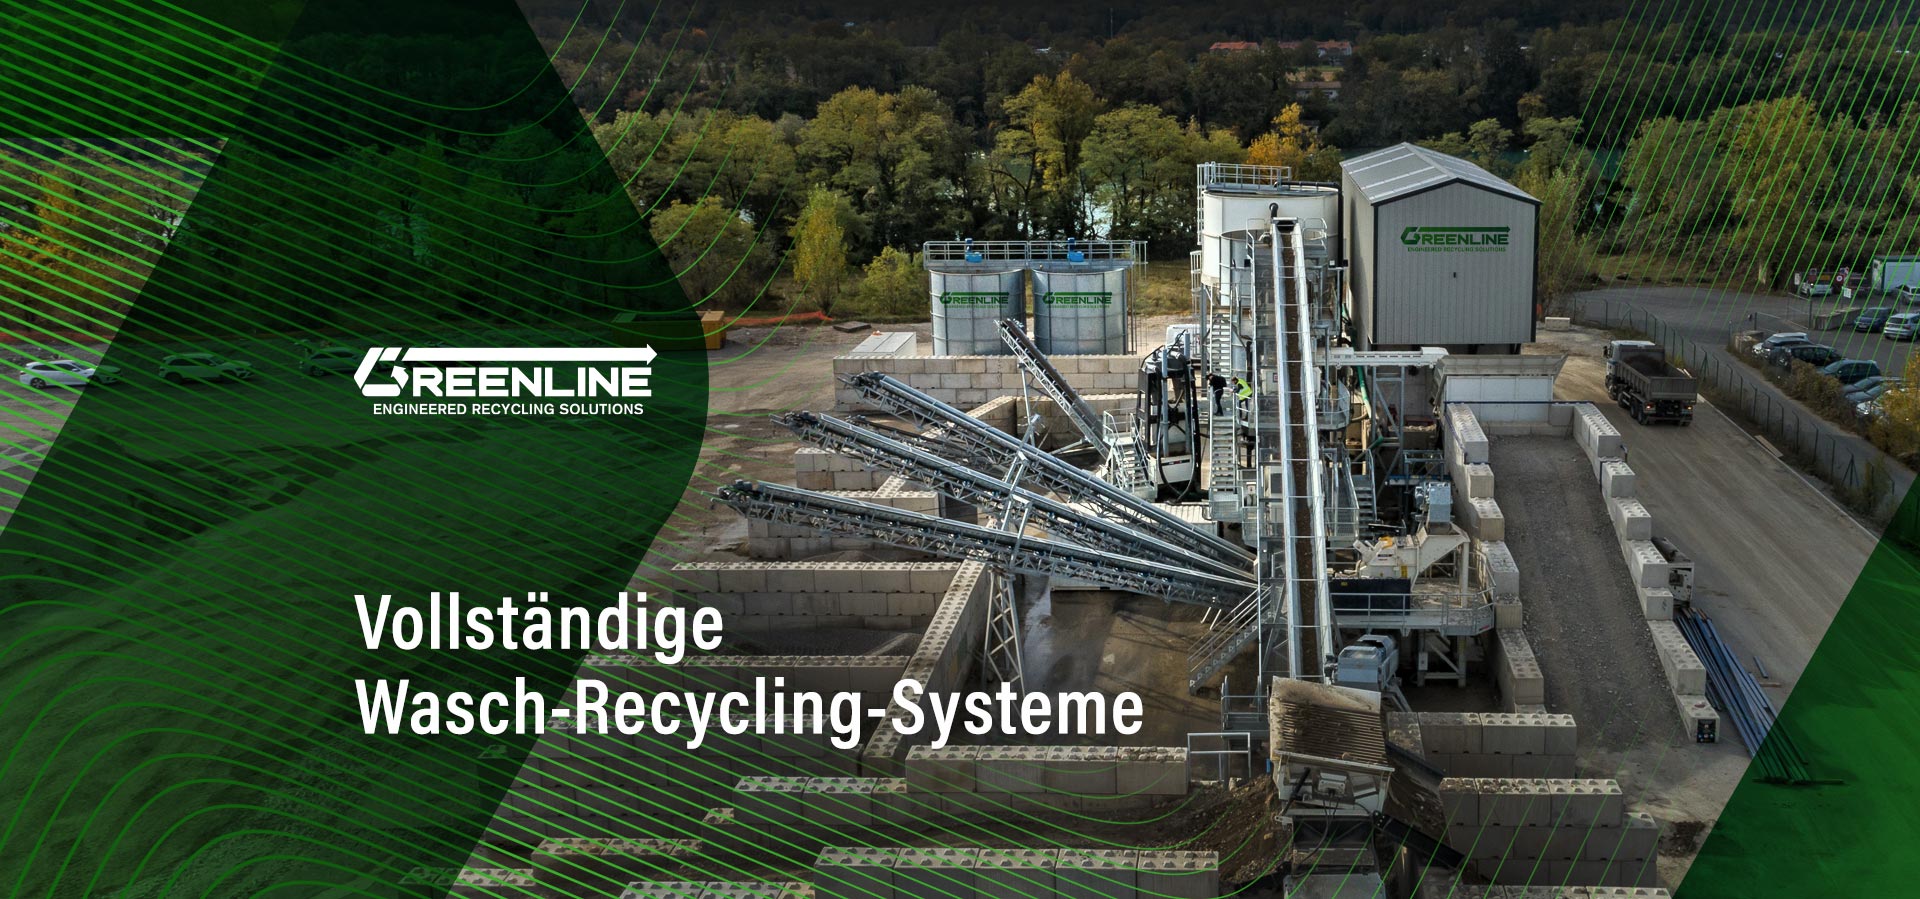 Greenline Wash Recycling Plant